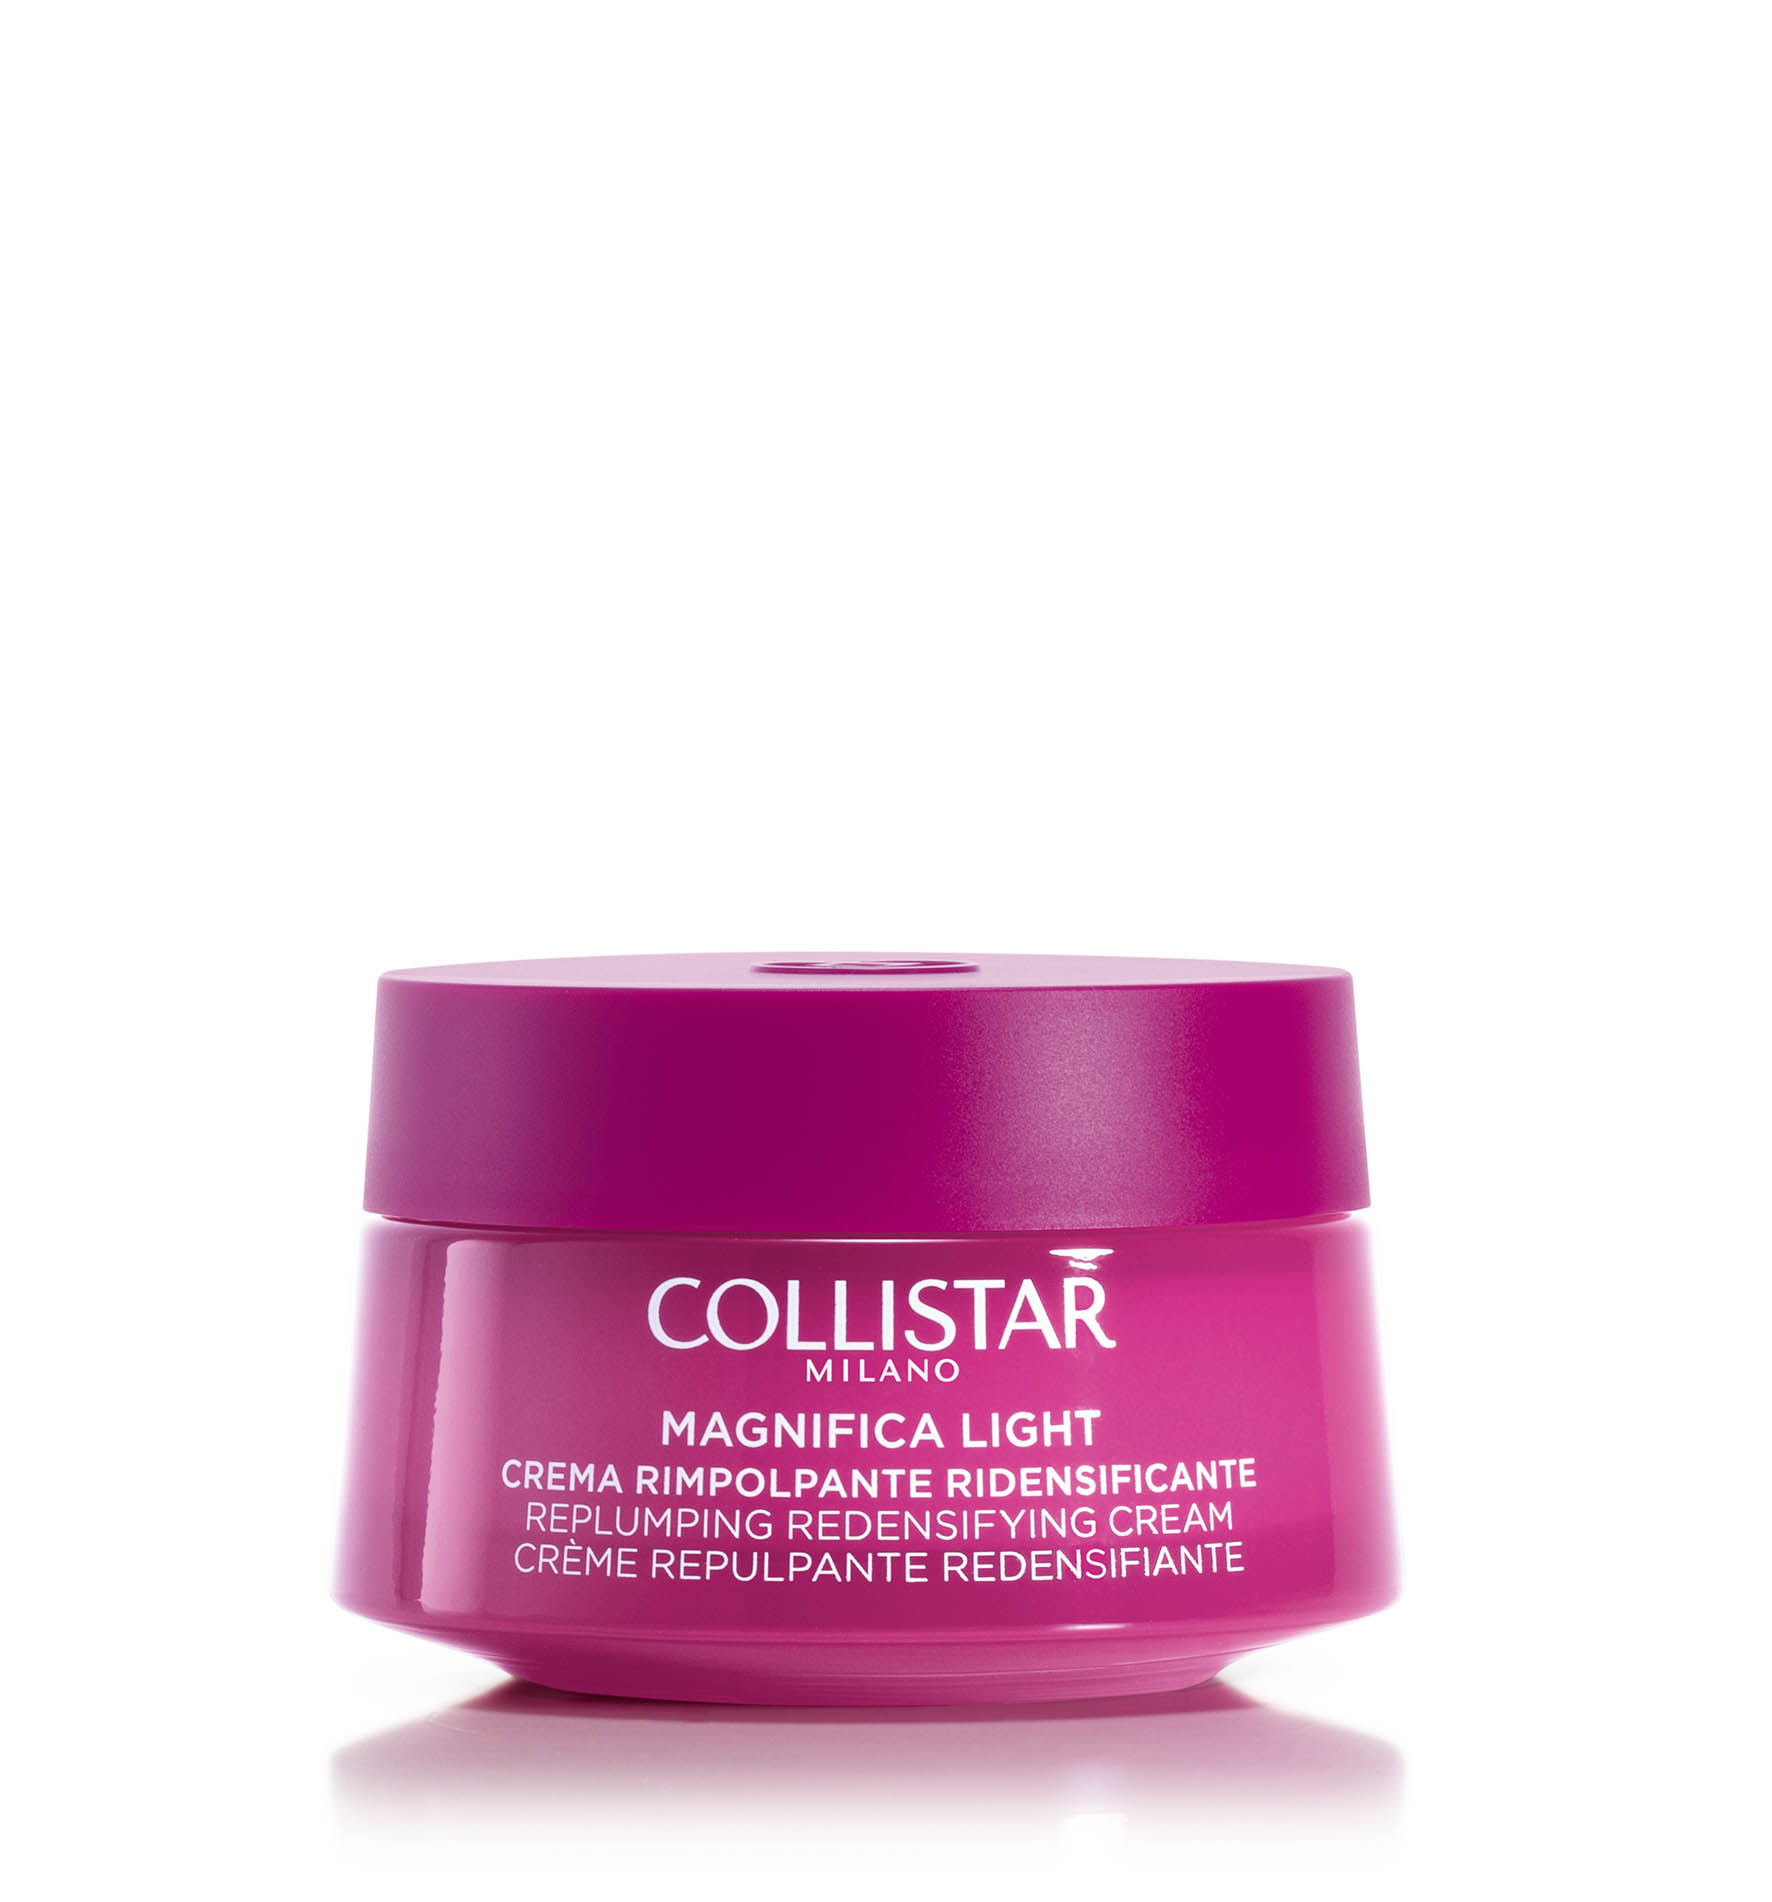 MAGNIFICA LIGHT REPLUMPING REDENSIFYING CREAM FACE AND NECK | Collistar - Shop Online Ufficiale